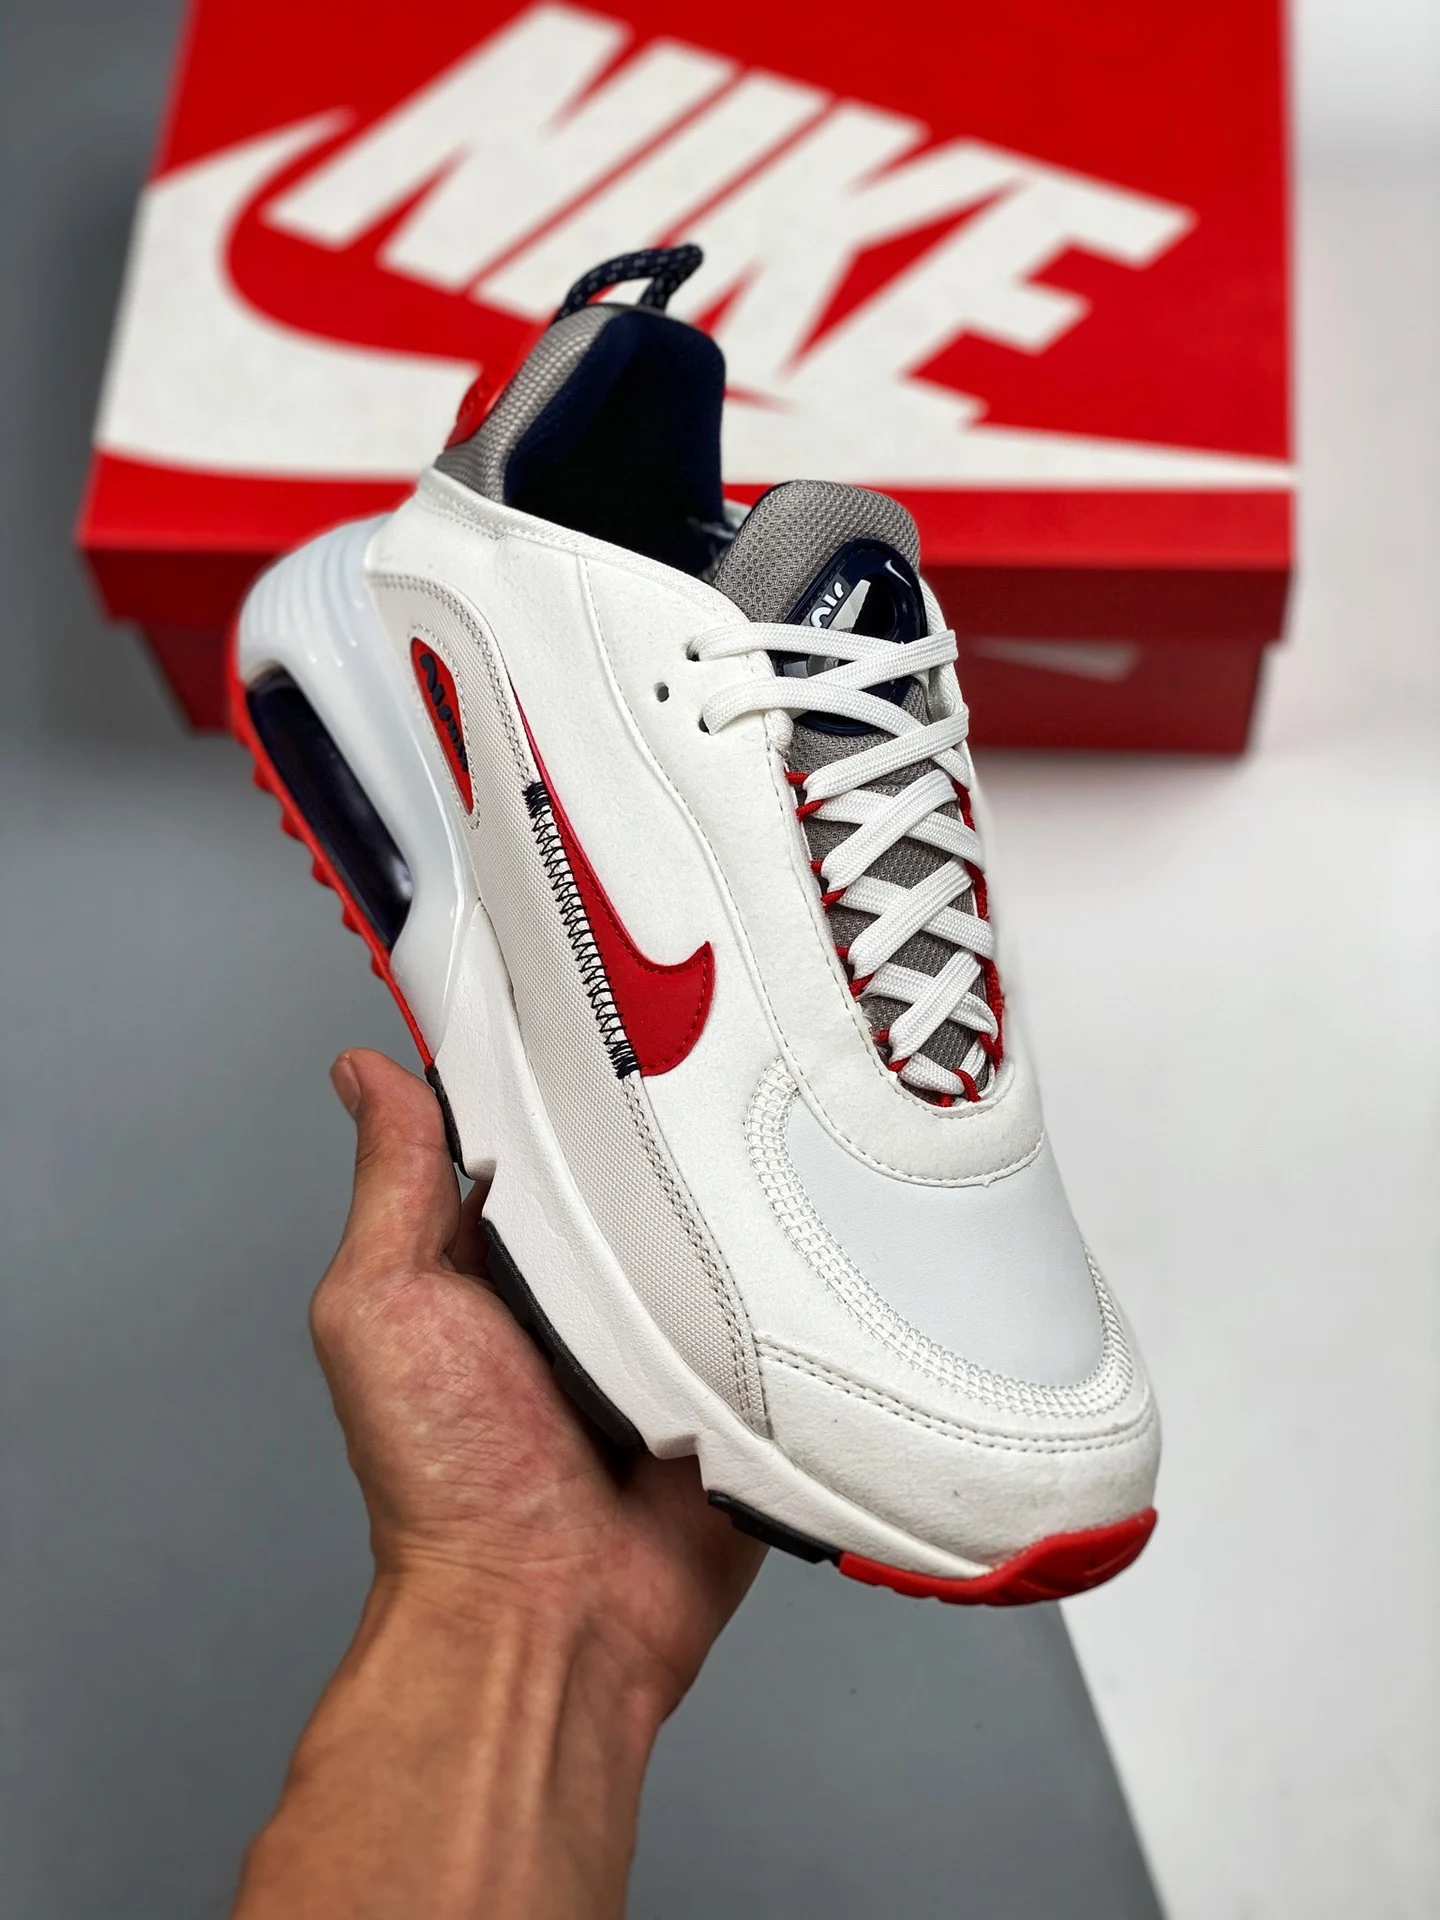 Nike Air Max 2090 White Red DH7708-100 On Sale